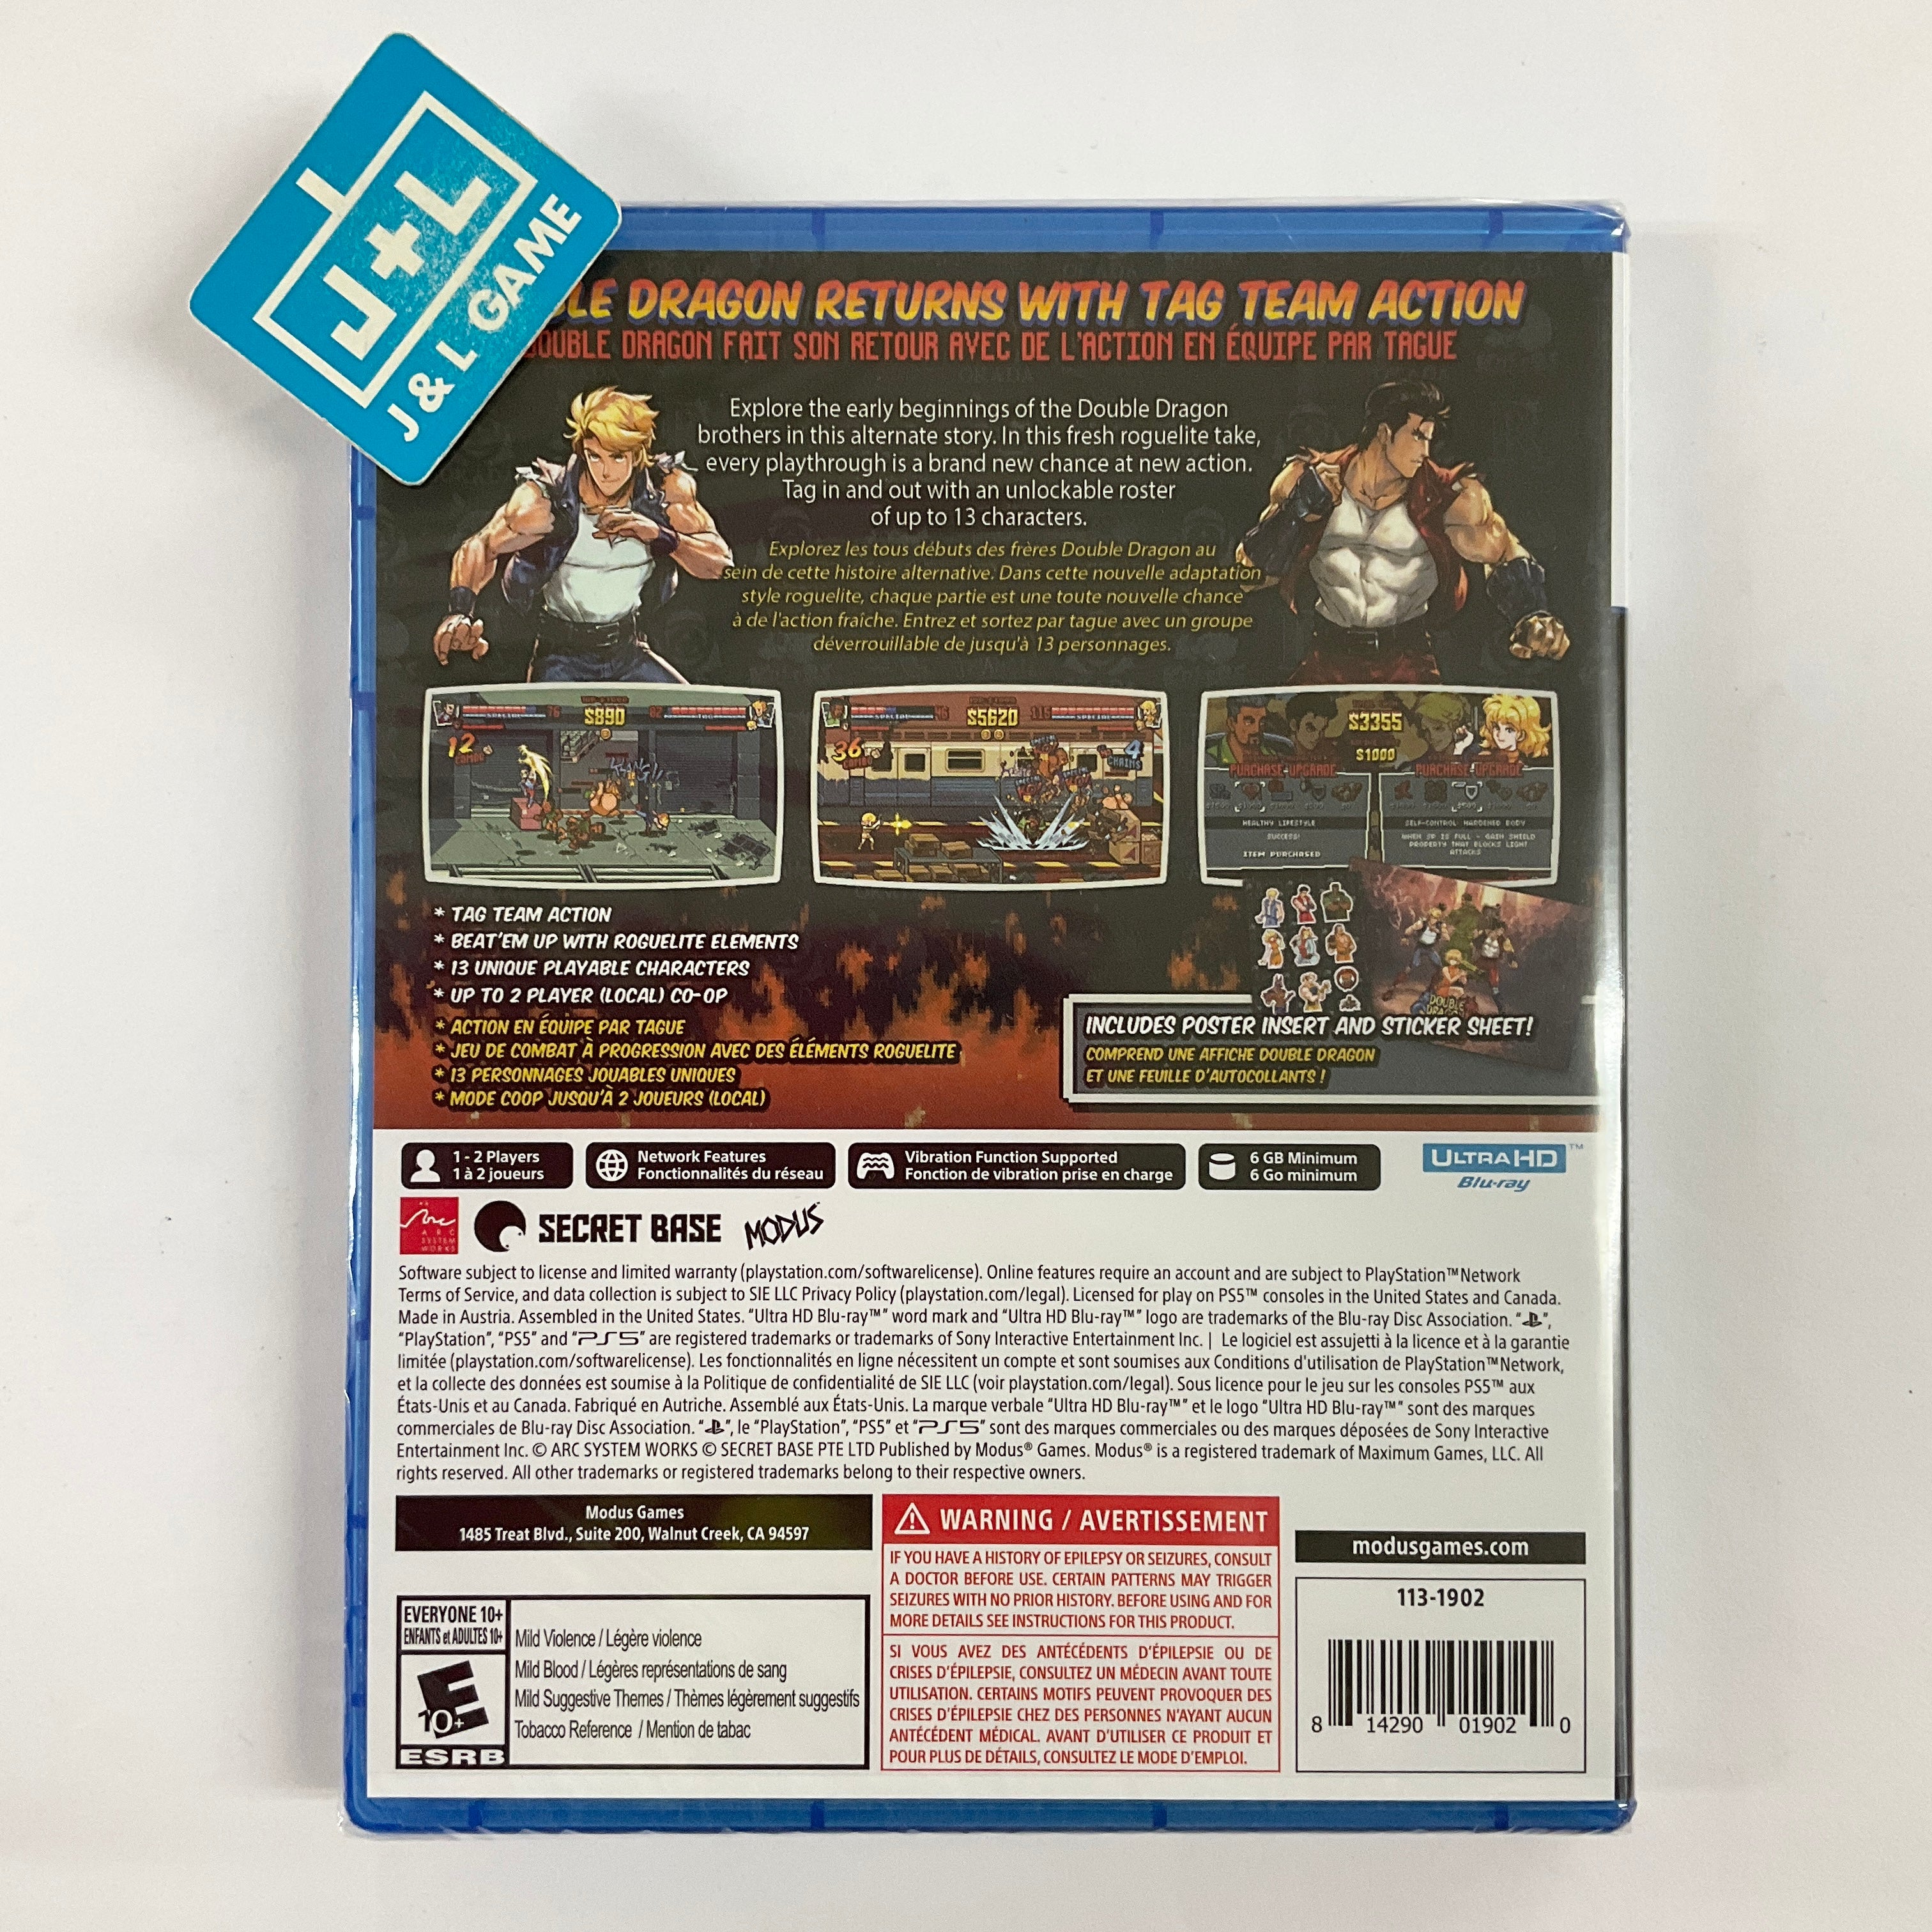 Double Dragon Gaiden: Rise of the Dragons - (PS5) PlayStation 5 Video Games Modus   